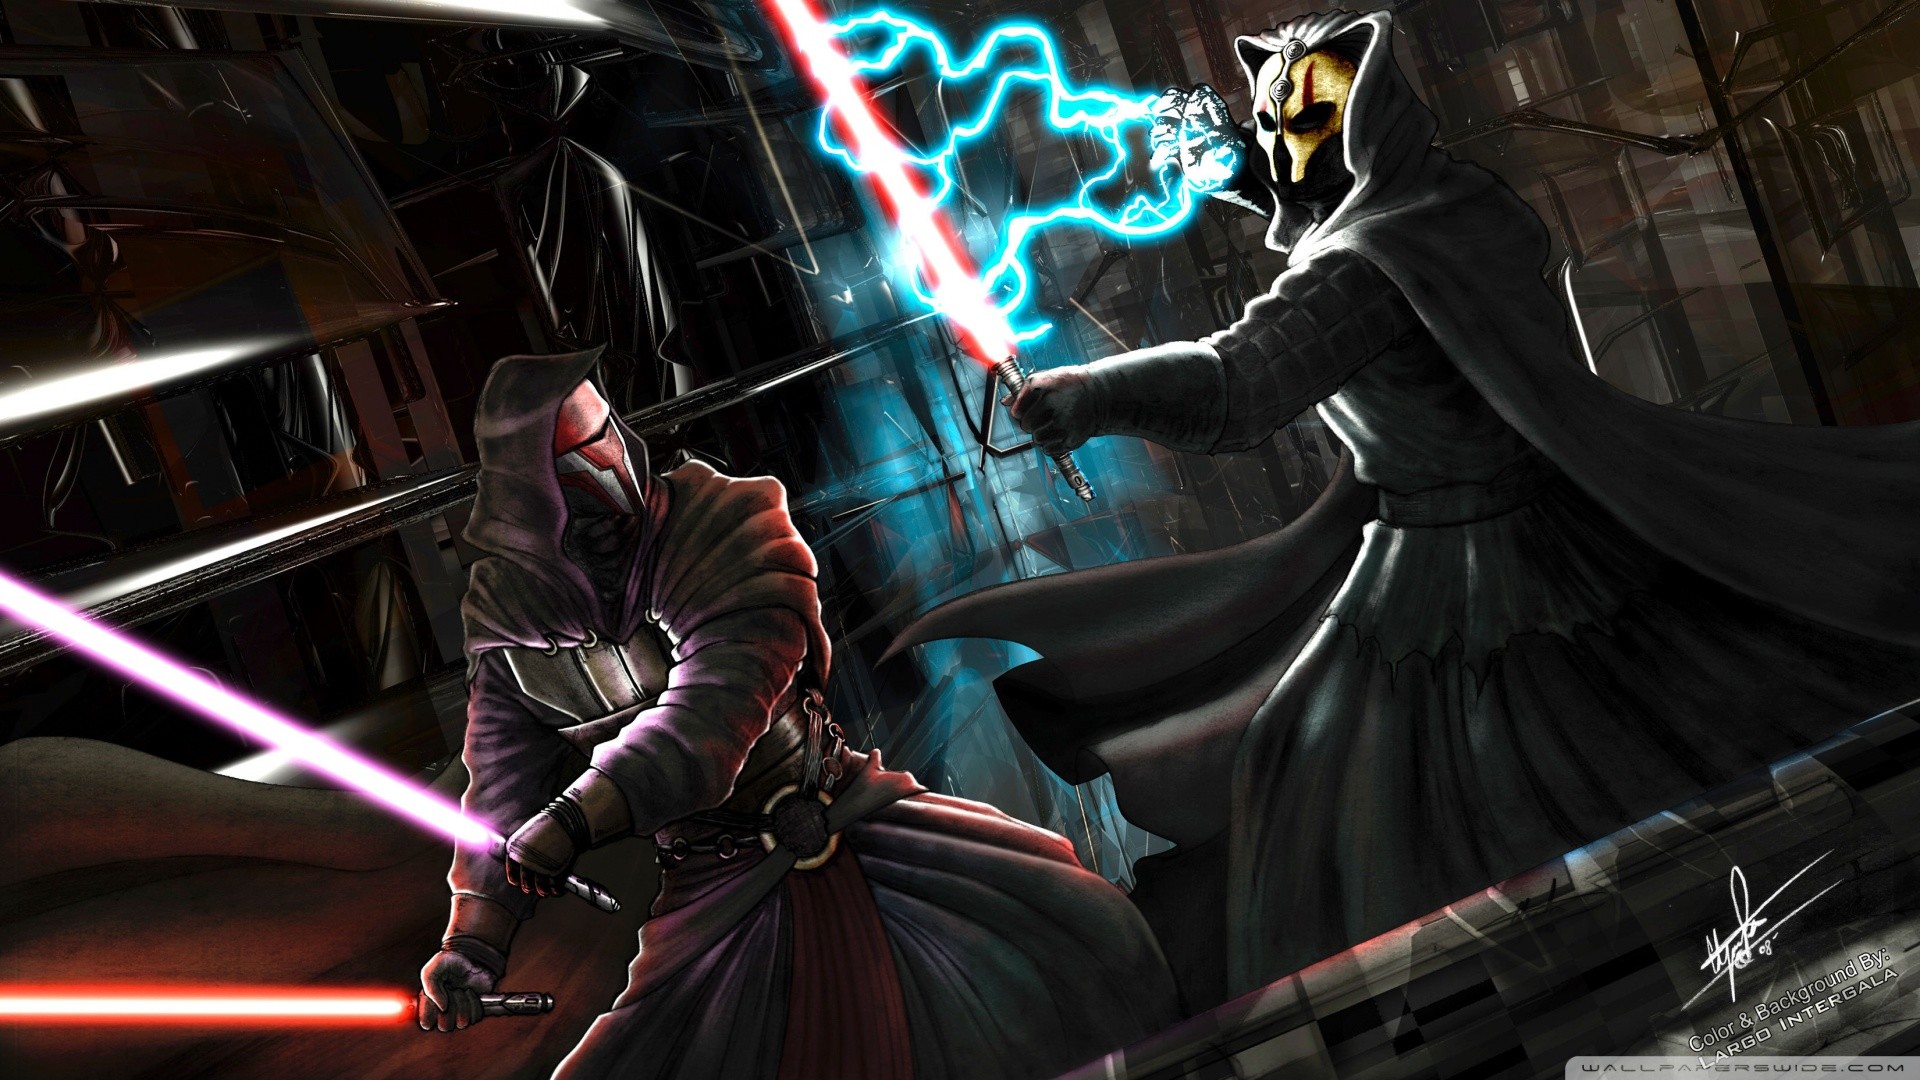 1920x1080 Collection of Darth Revan Wallpaper on HDWallpapers